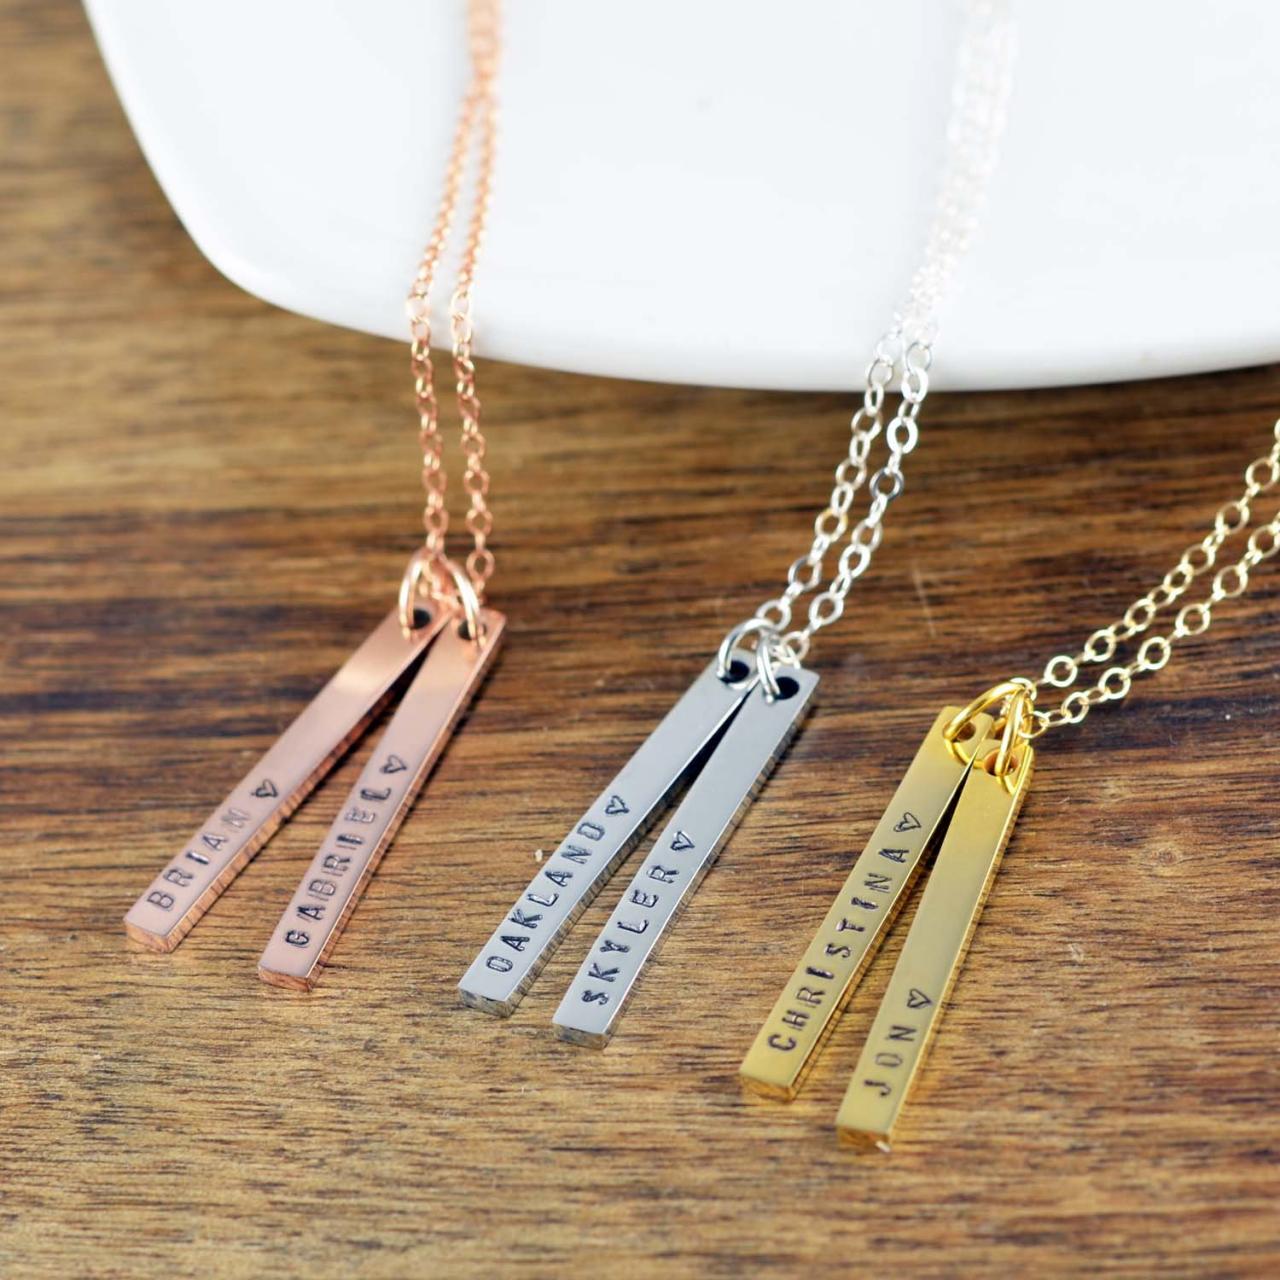 Vertical Skinny Bar Necklace, Nameplate Necklace, Simple Everyday Necklace, Mom Necklace Bar, Name Necklace For Mother, Mother's Day